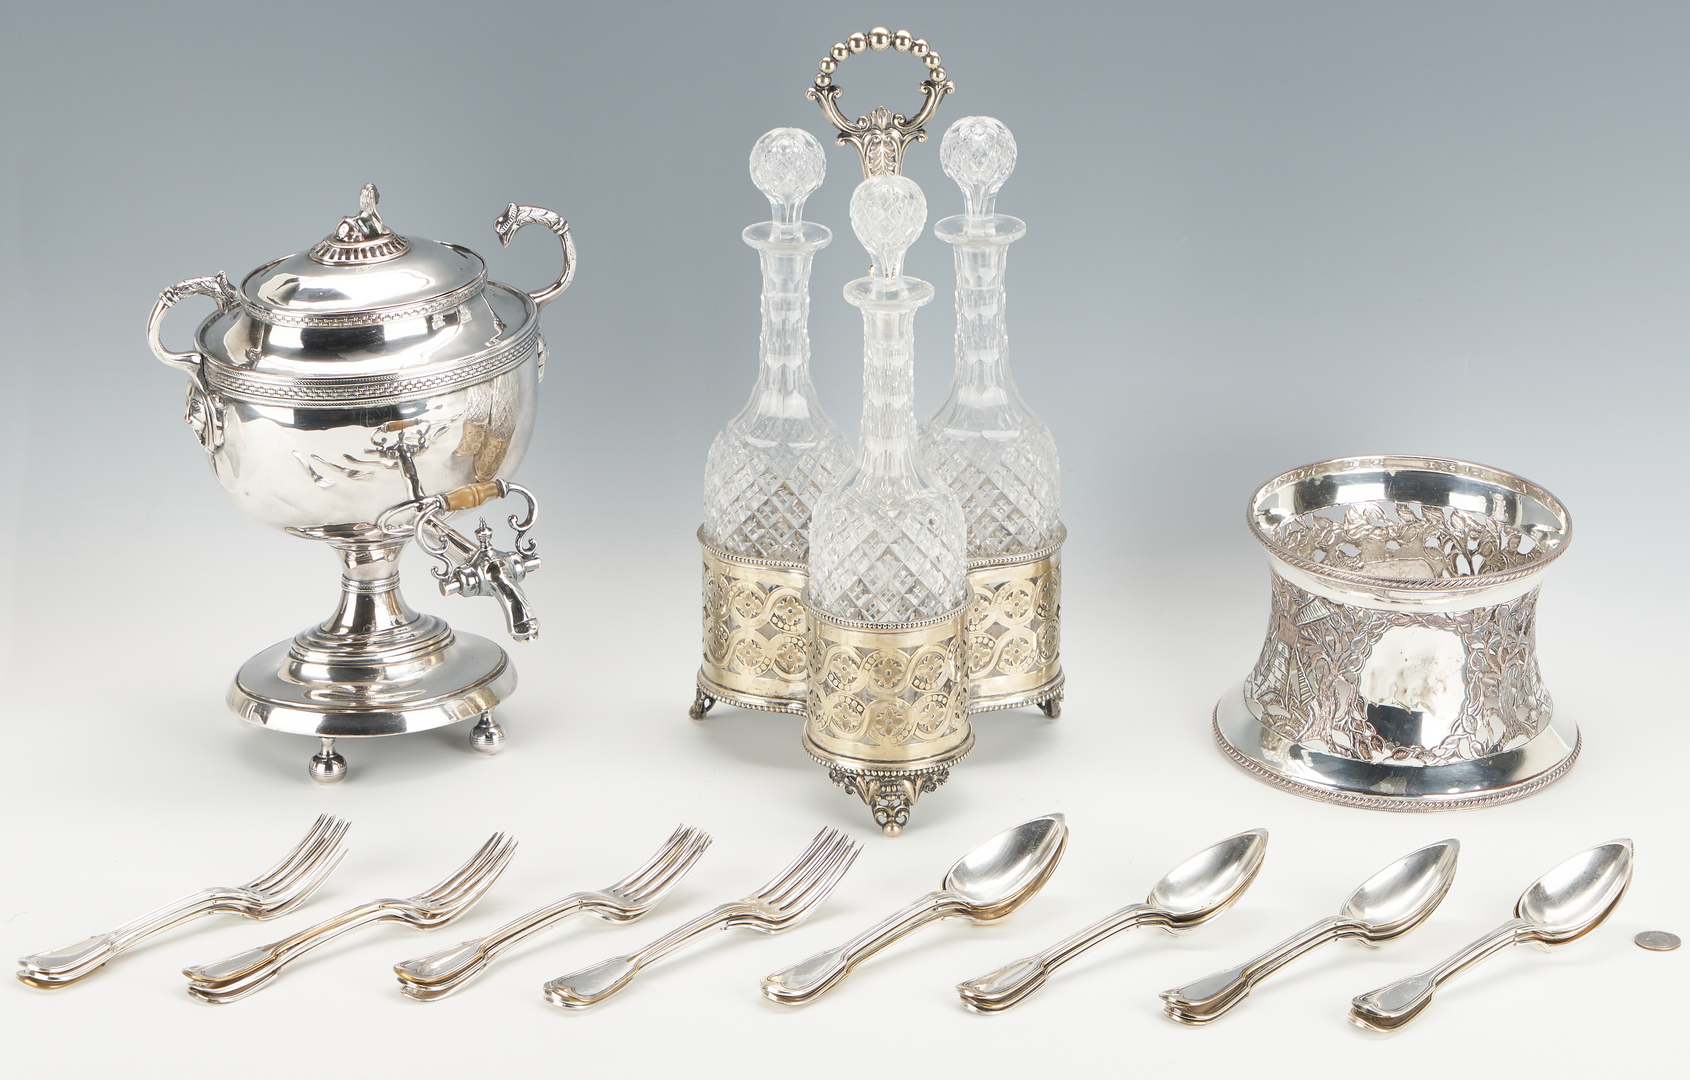 Lot 1168: Silverplated Urn, Bottle Stand, Dish Ring & Christofle Flatware